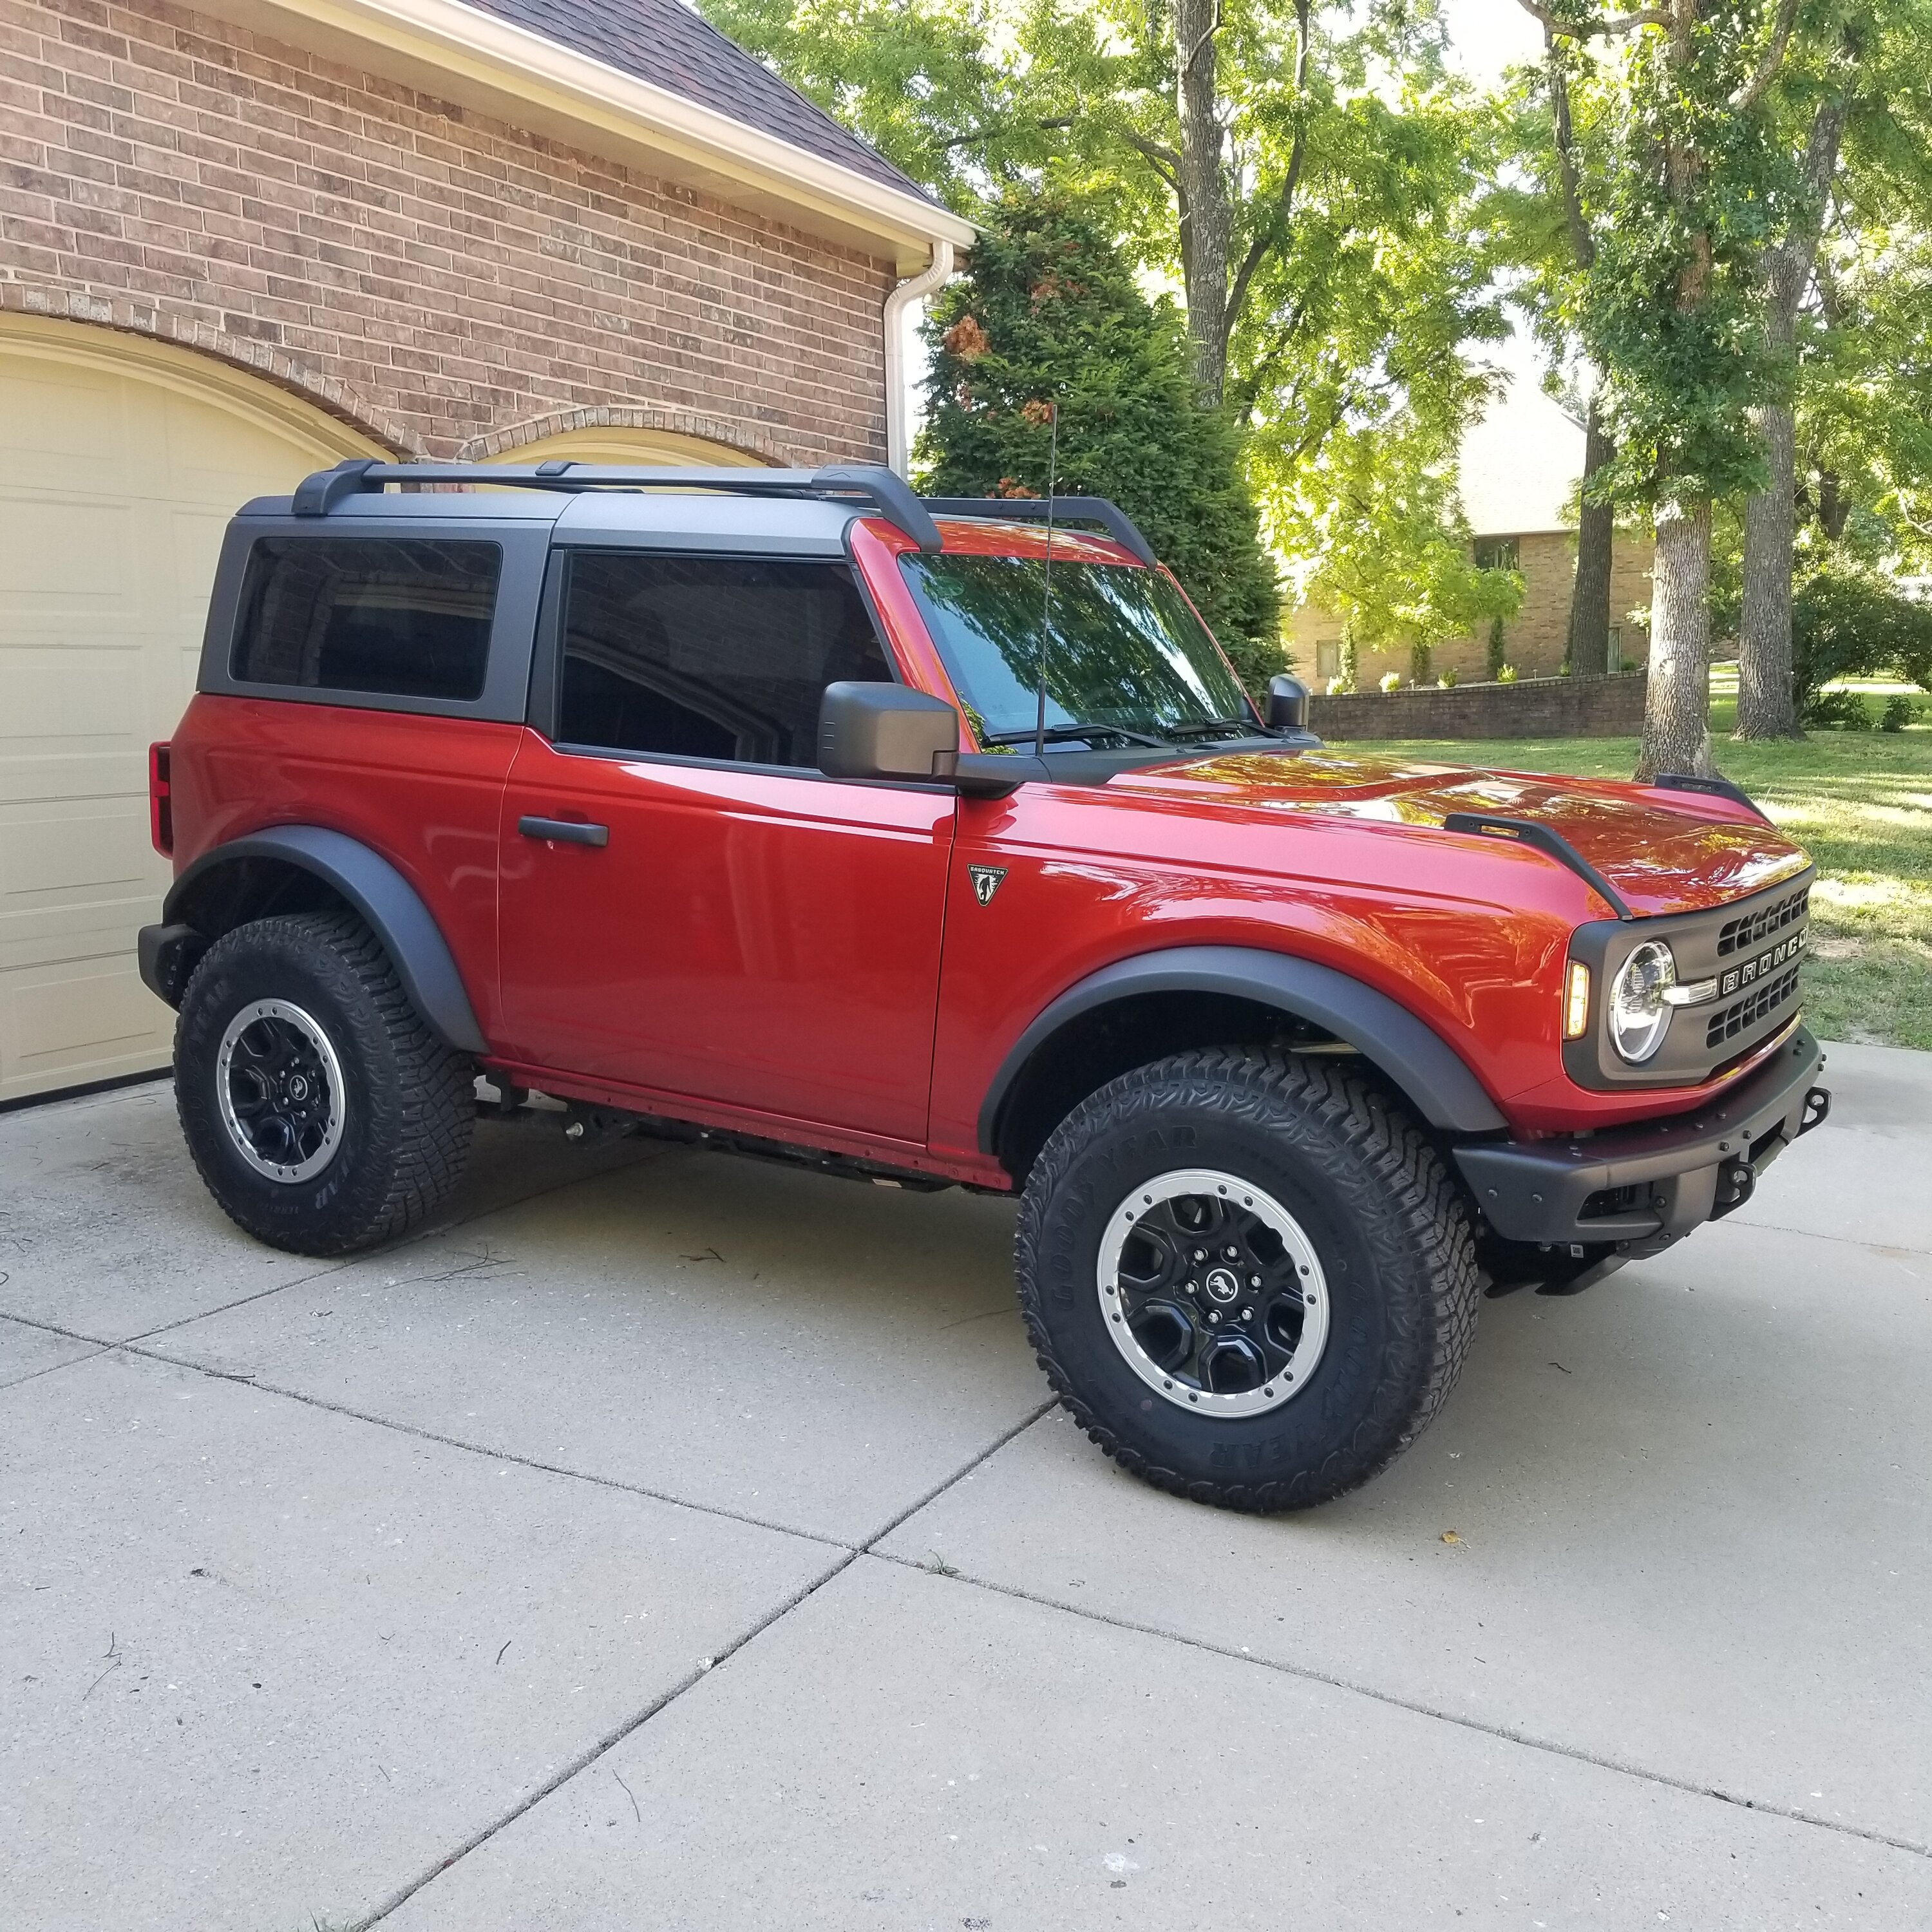 Ford Bronco Tint reference gallery -- post your Bronco pics & specs 📸 😎 20220620_173240